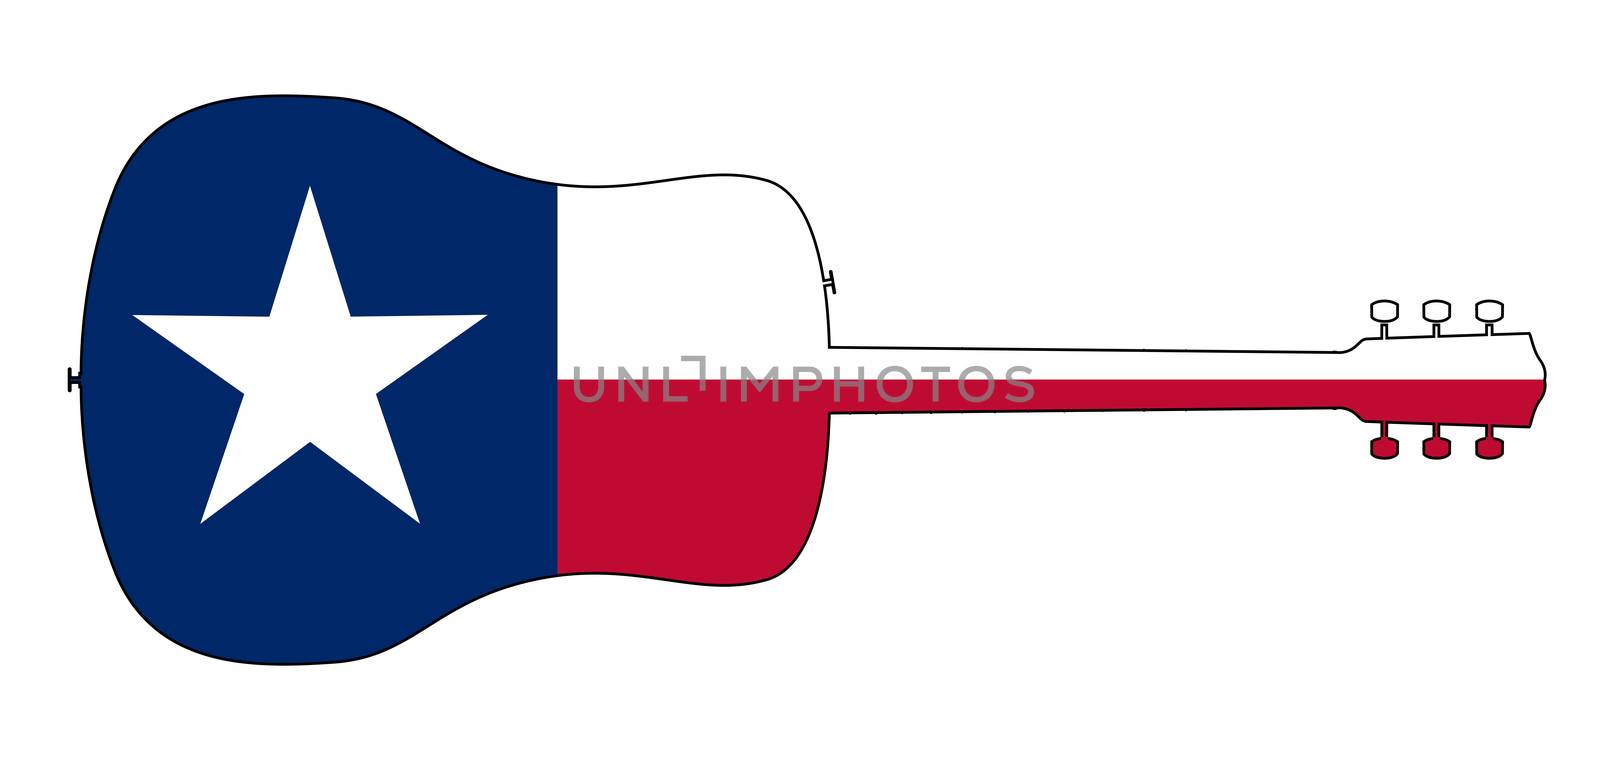 A typical acoustic guitar silhouette outline isolated over a white background with a Texan flag